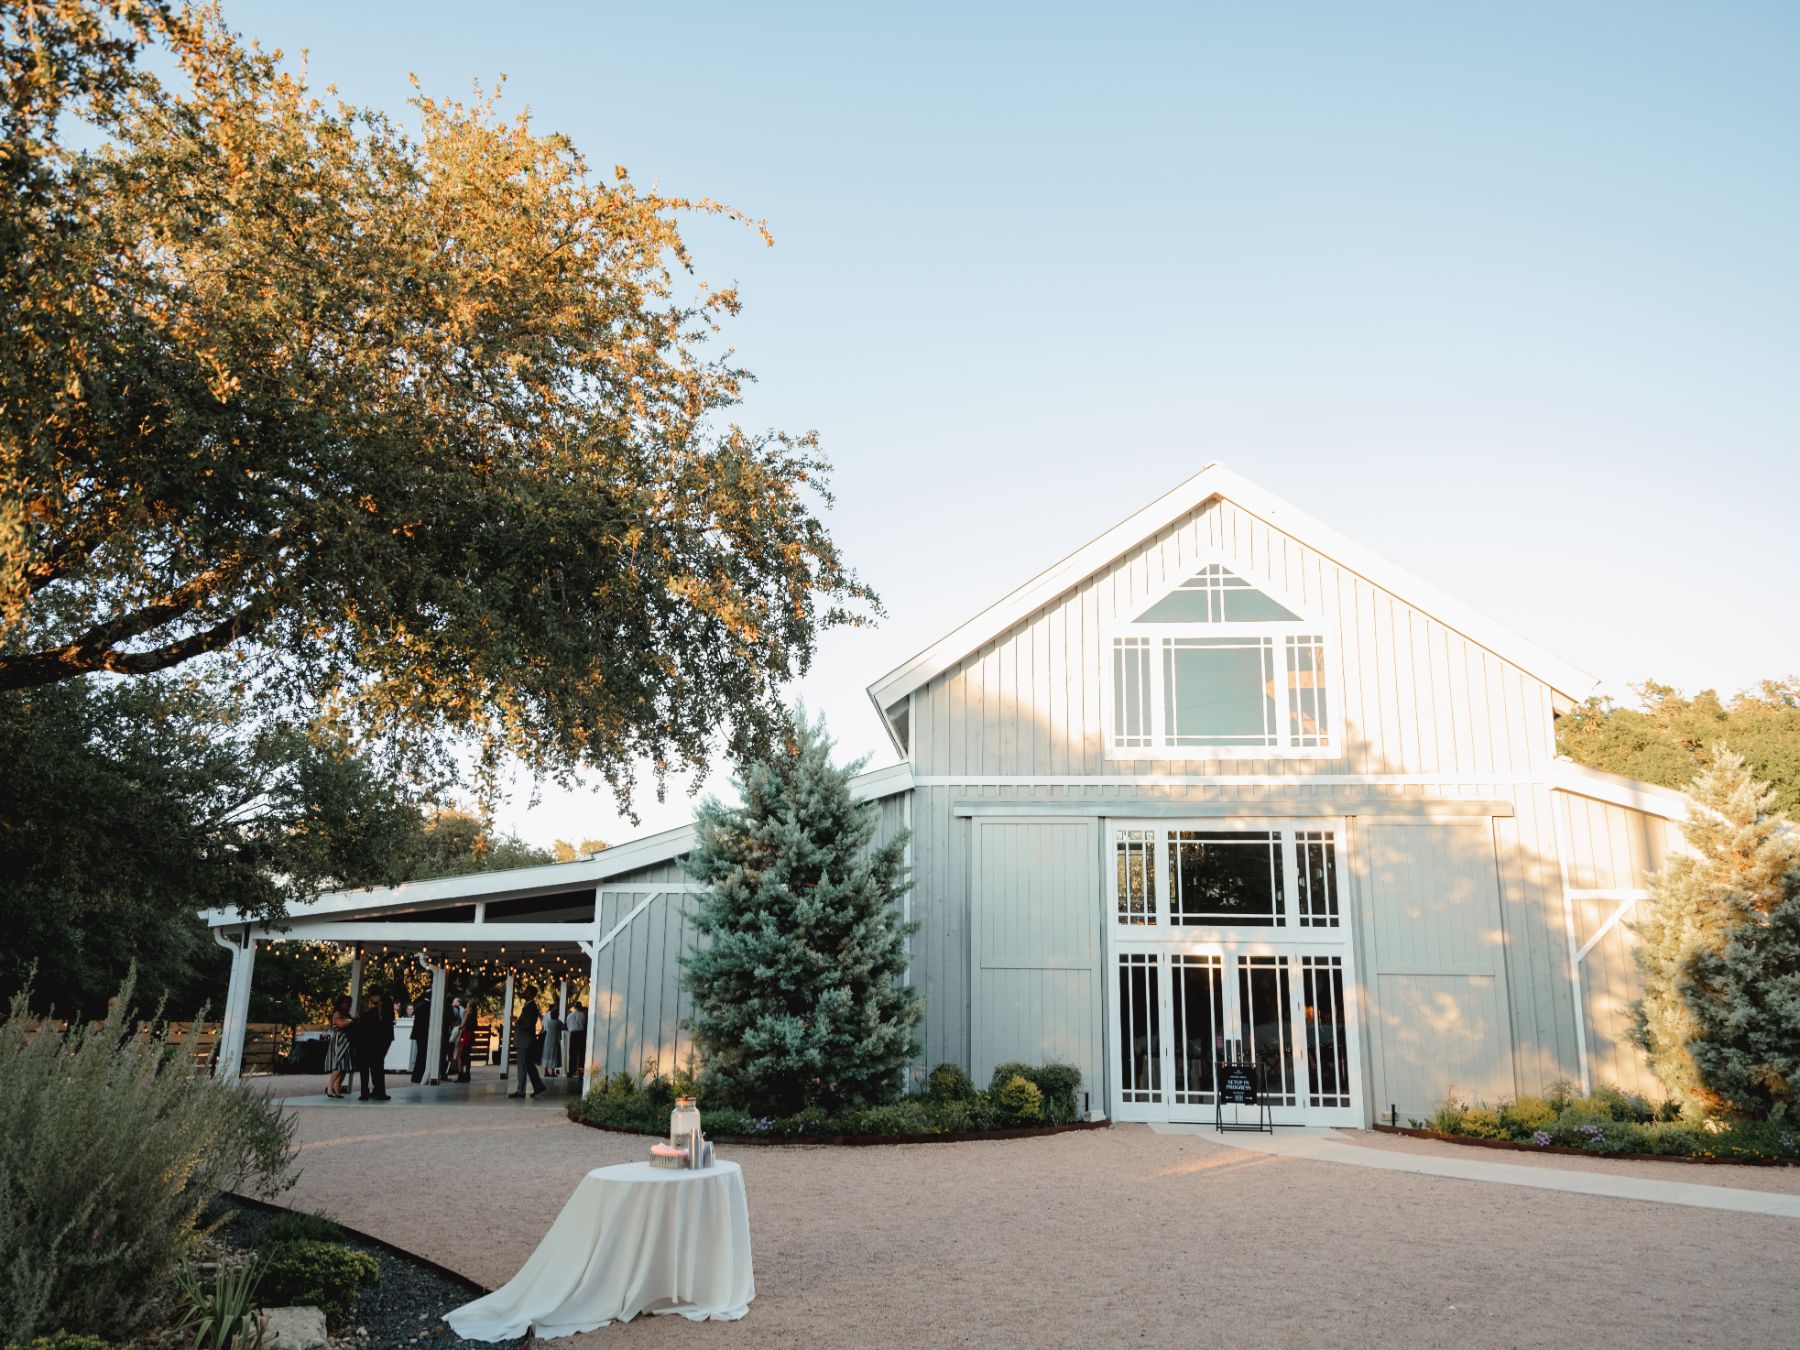 Beautiful large gray barn, surrounded by natural scenery and large trees at The Addison Grove wedding venue in Austin Texas.